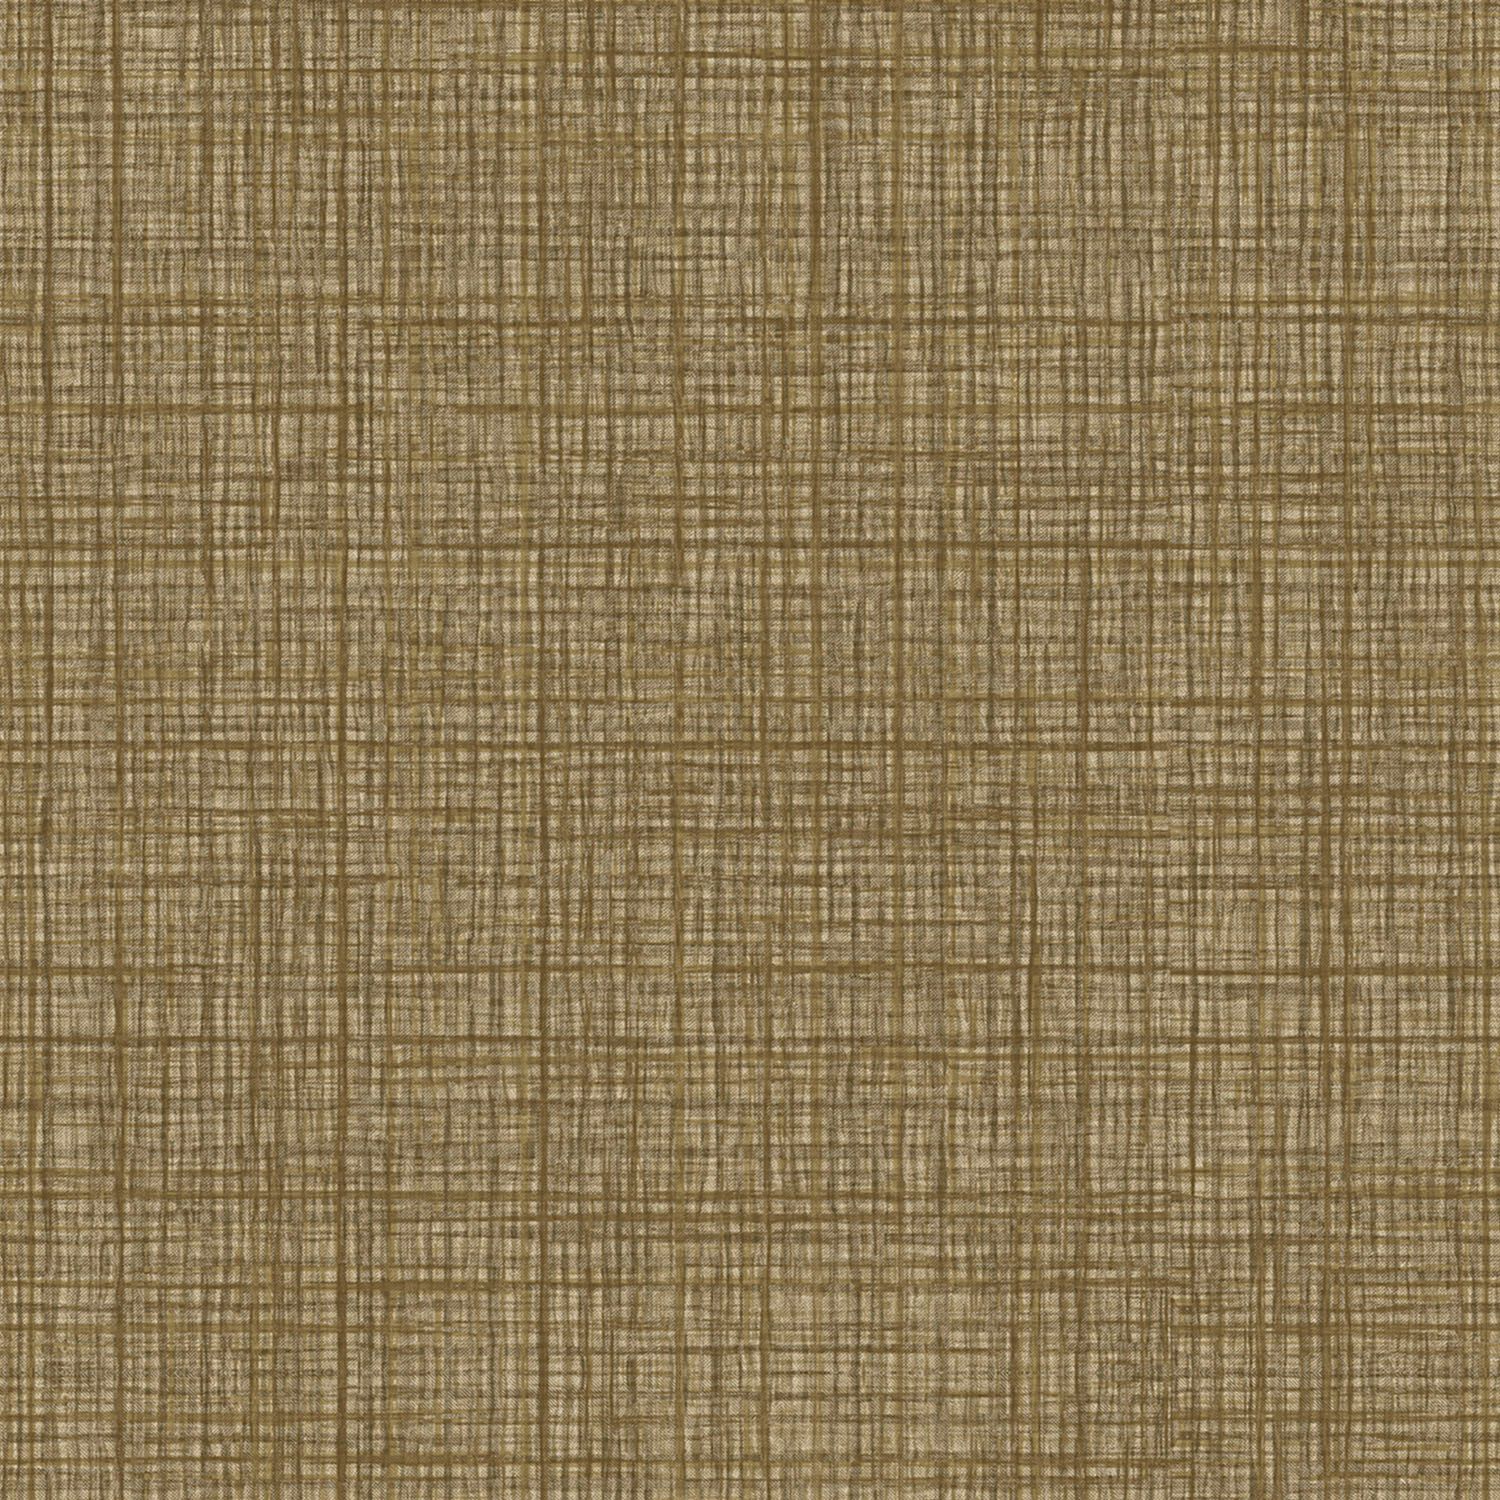 Native Fabric LVT In Straw numéro d’image 2